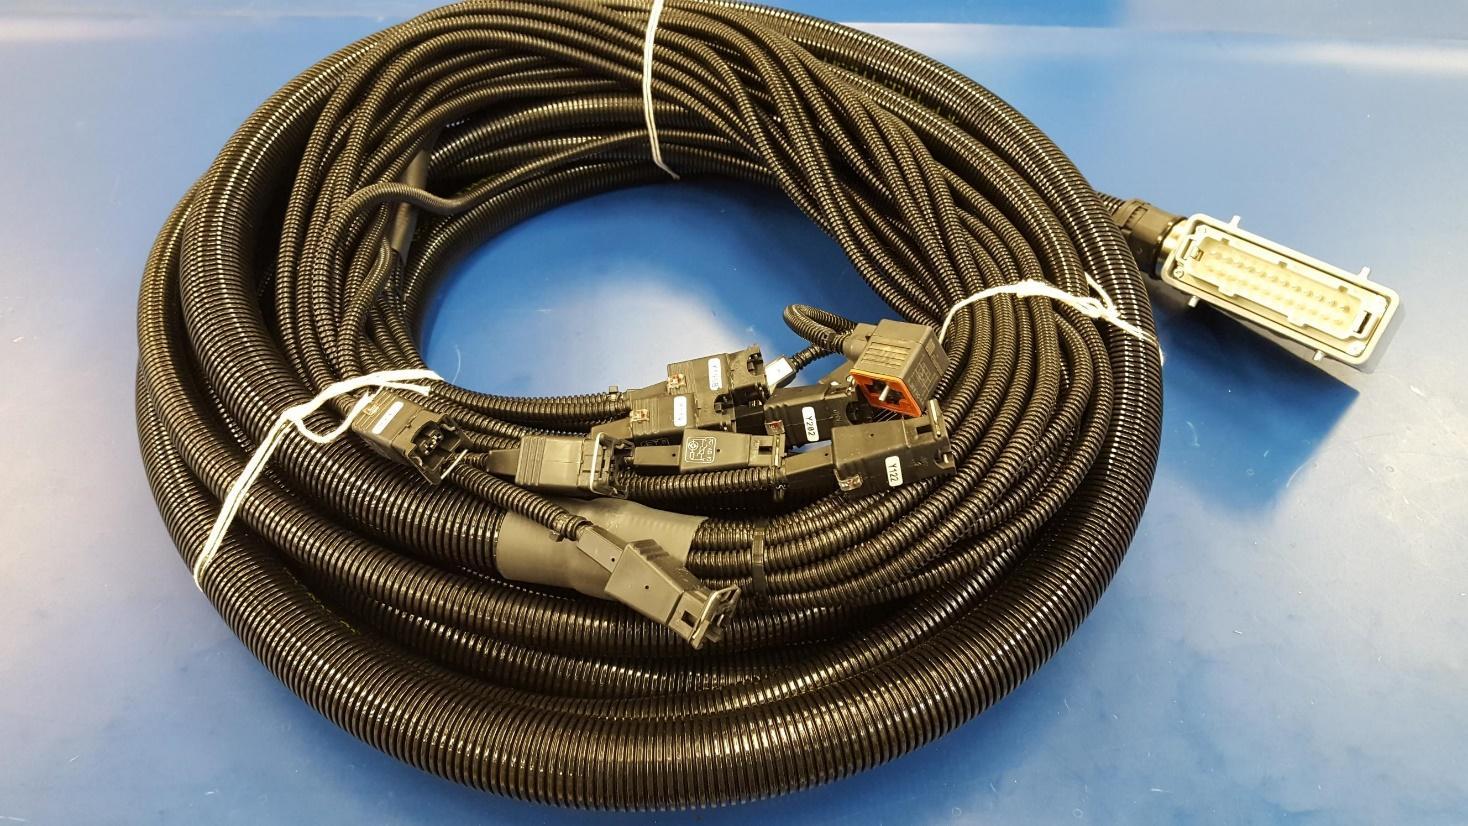 Loomed wiring harness